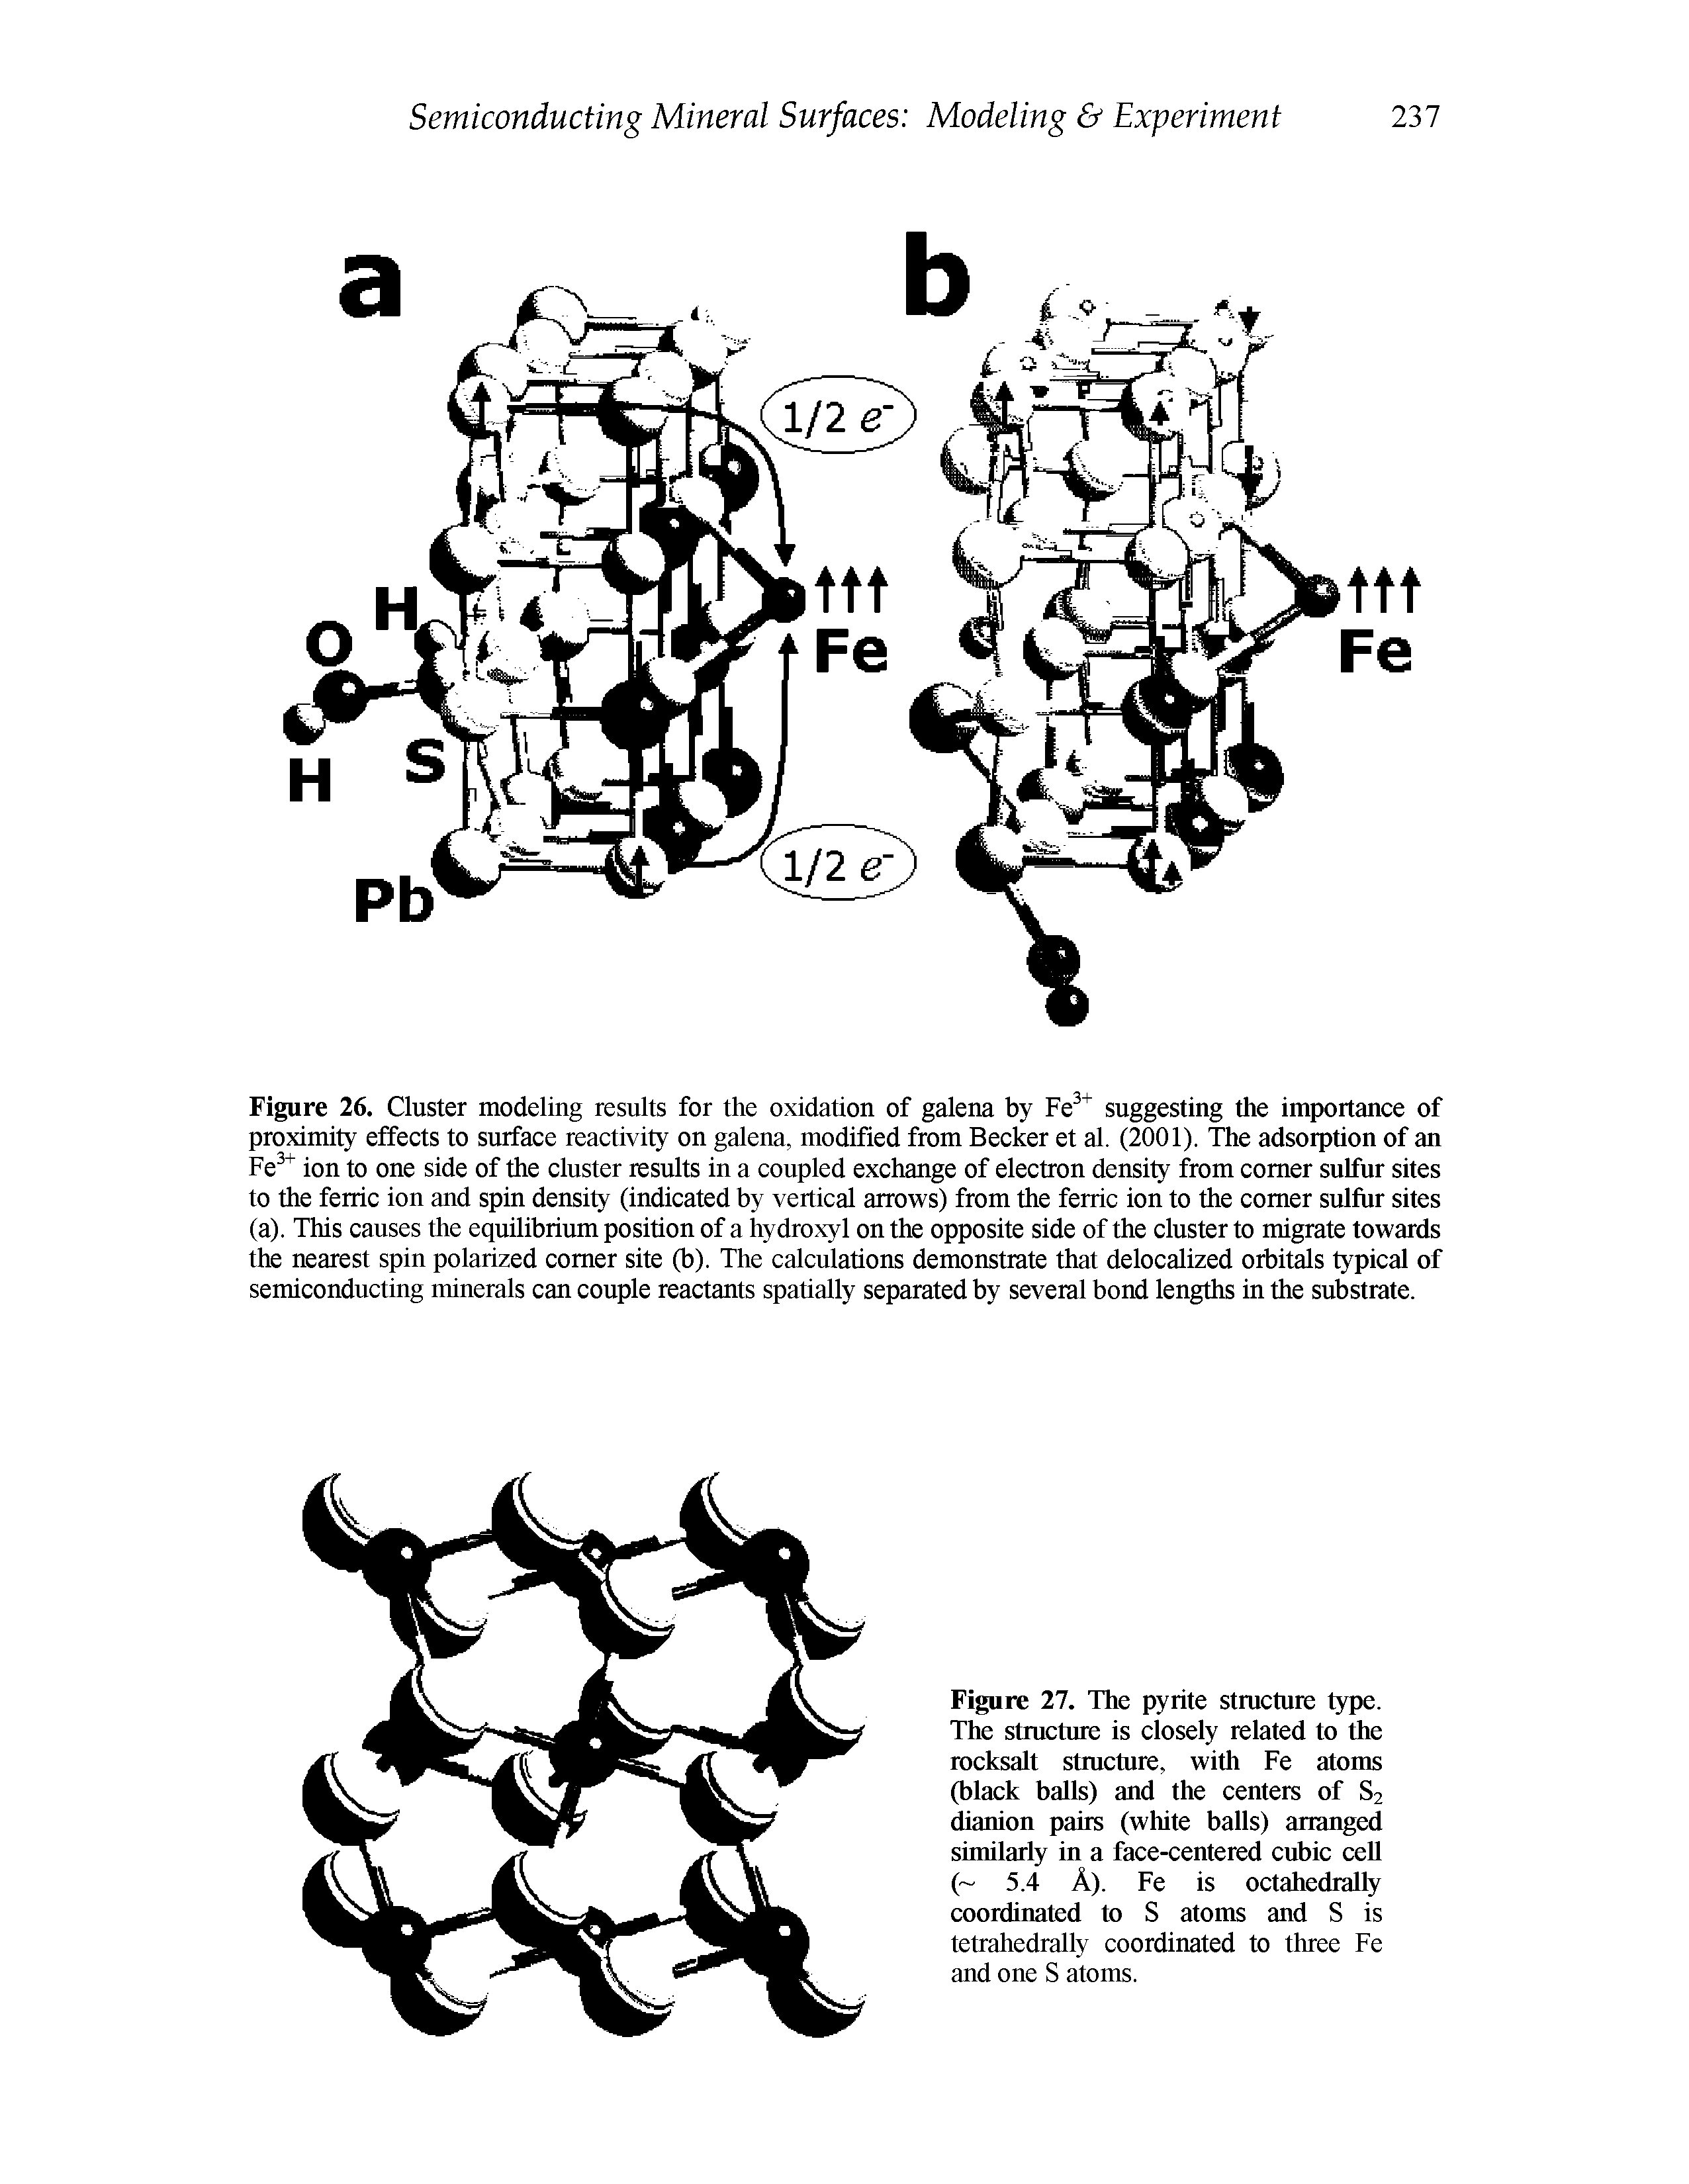 Figure 26. Cluster modeling results for the oxidation of galena by Fe suggesting the importance of proximity effects to surface reactivity on galena, modified from Becker et al. (2001). The adsorption of an Fe ion to one side of the cluster results in a coupled exchange of electron density from comer sulfur sites to the ferric ion and spin density (indicated by vertical arrows) from the ferric ion to the comer sulfur sites (a). This causes the equilibrium position of a hydroxyl on the opposite side of the cluster to migrate towards tlK nearest spin polarized comer site (b). The calculations demonstrate that delocalized orbitals typical of semiconducting minerals can couple reactants spatially separated by several bond lengths in the substrate.